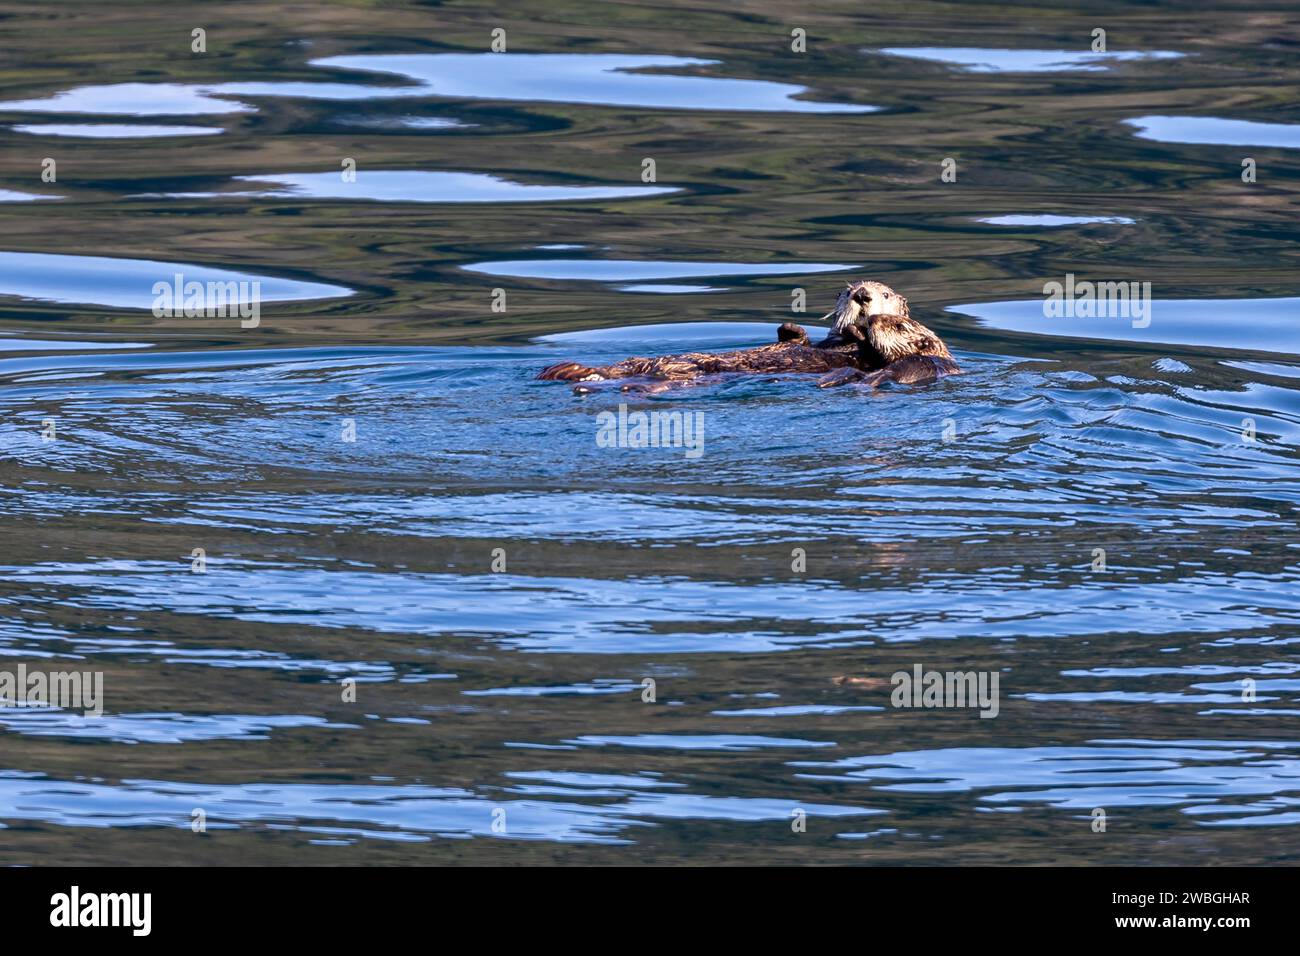 Mother and baby Sea Otter, Enhydra lutris, floating in blue waters Stock Photo